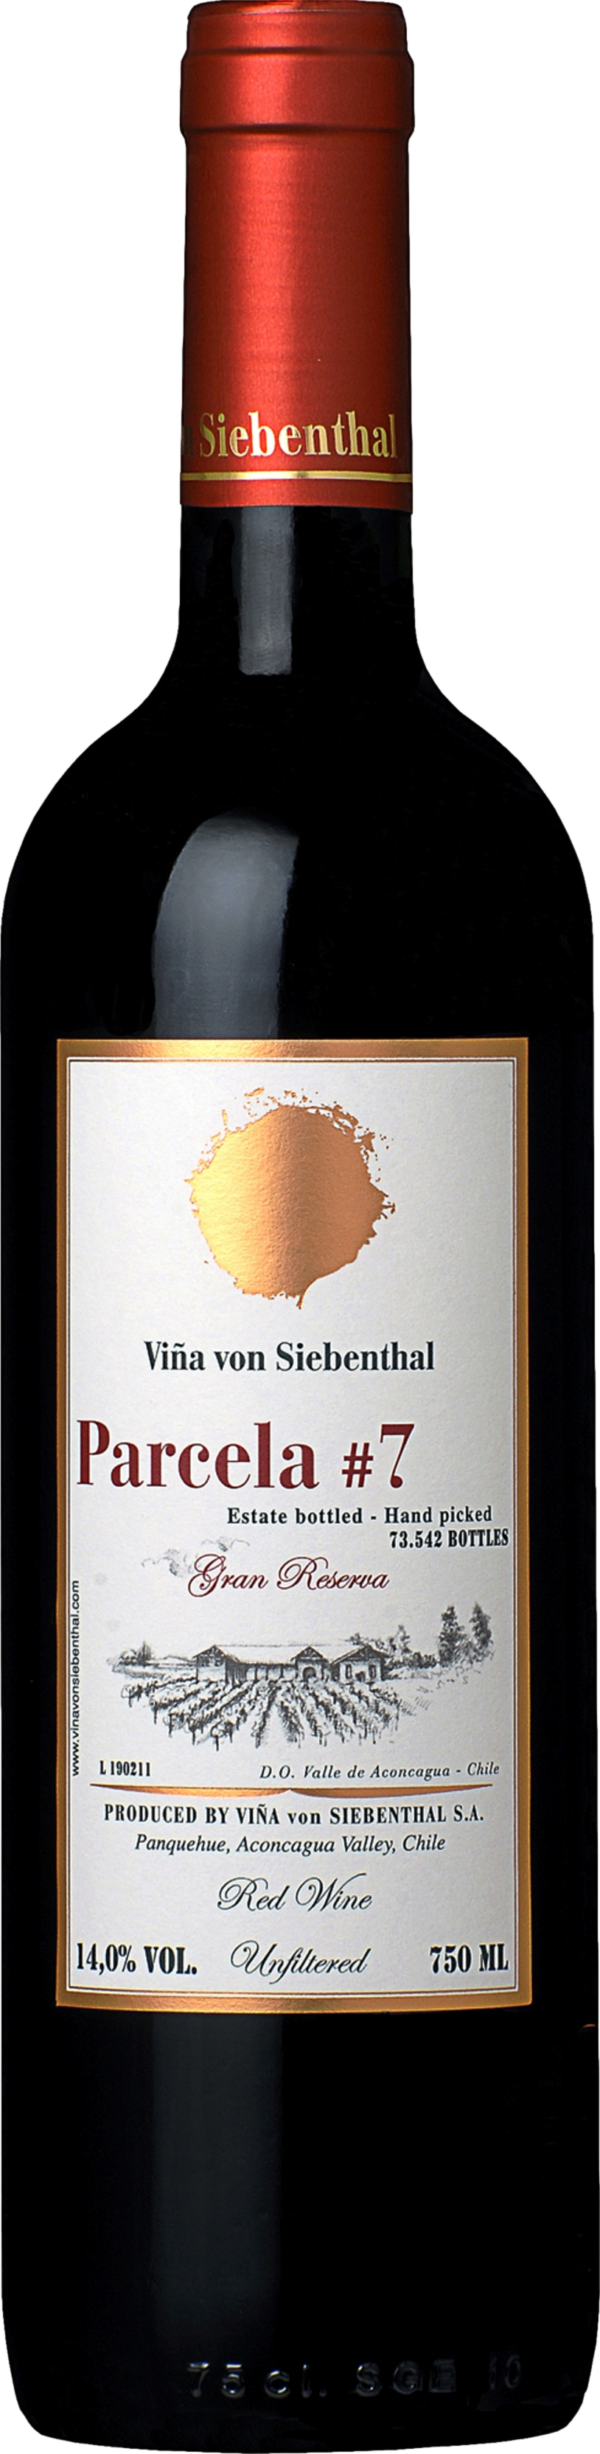 Product image of Vina von Siebenthal Parcela 7 2019 from 8wines